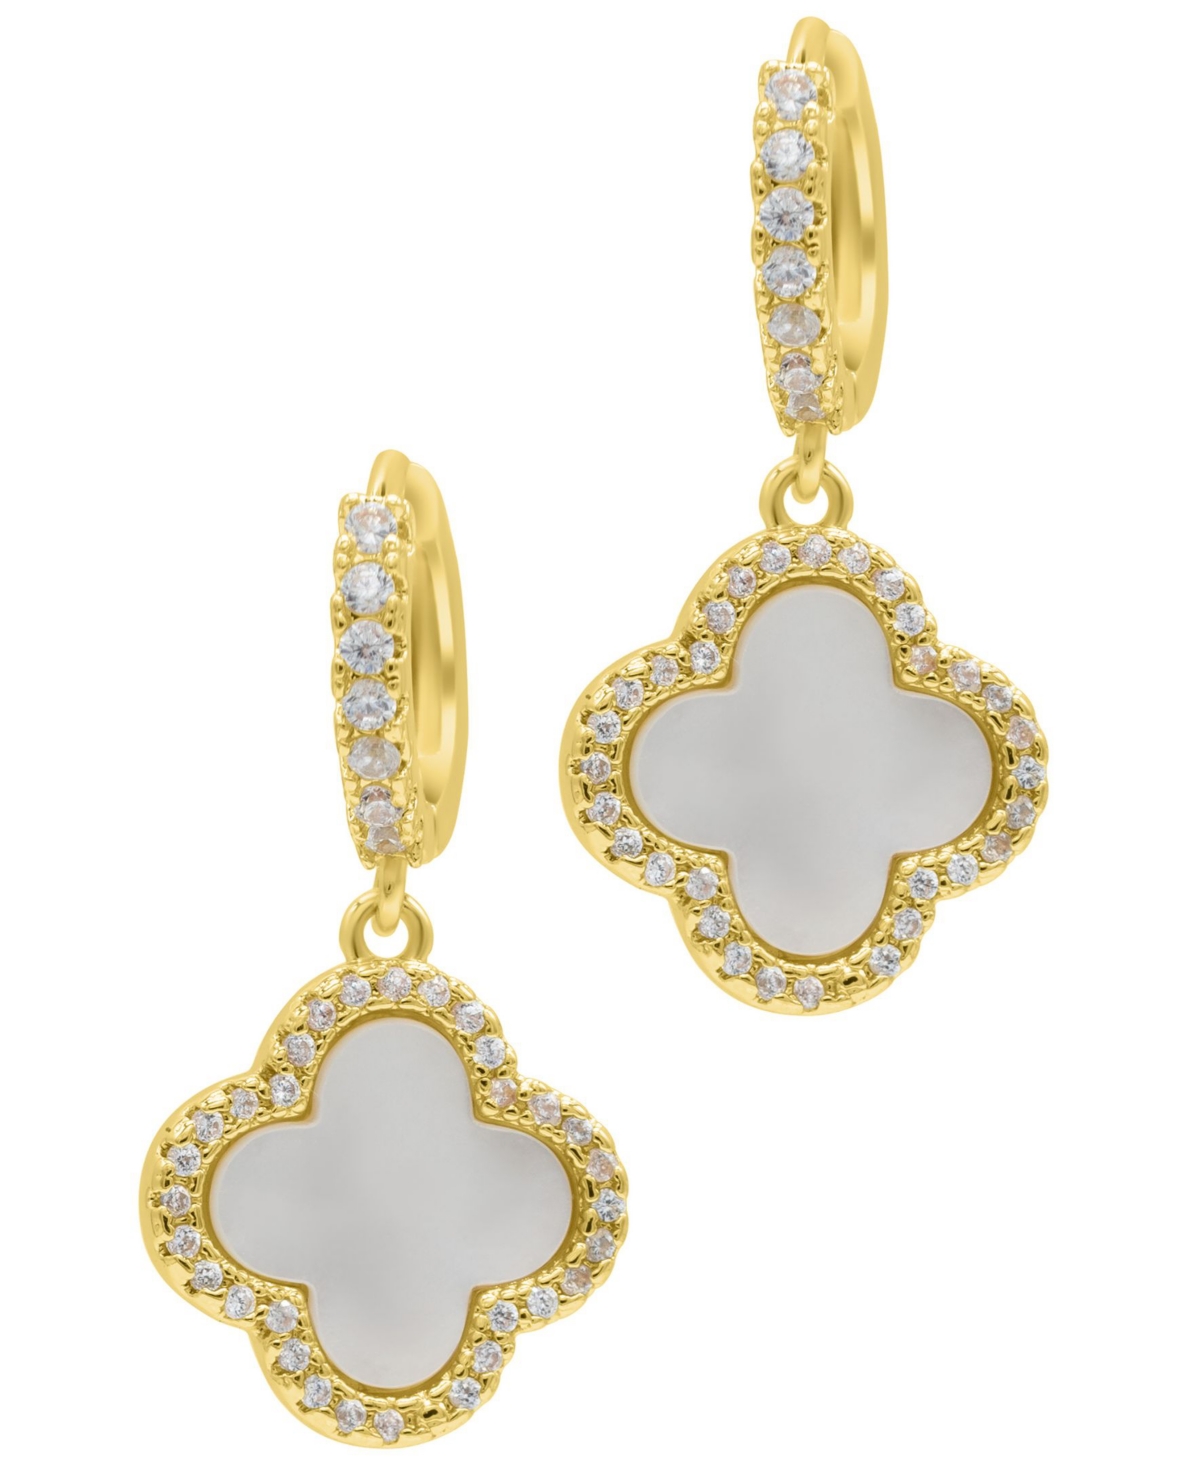 14K Gold-Plated Crystal Halo White Mother-of-Pearl Clover Dangle Huggie Earrings - White